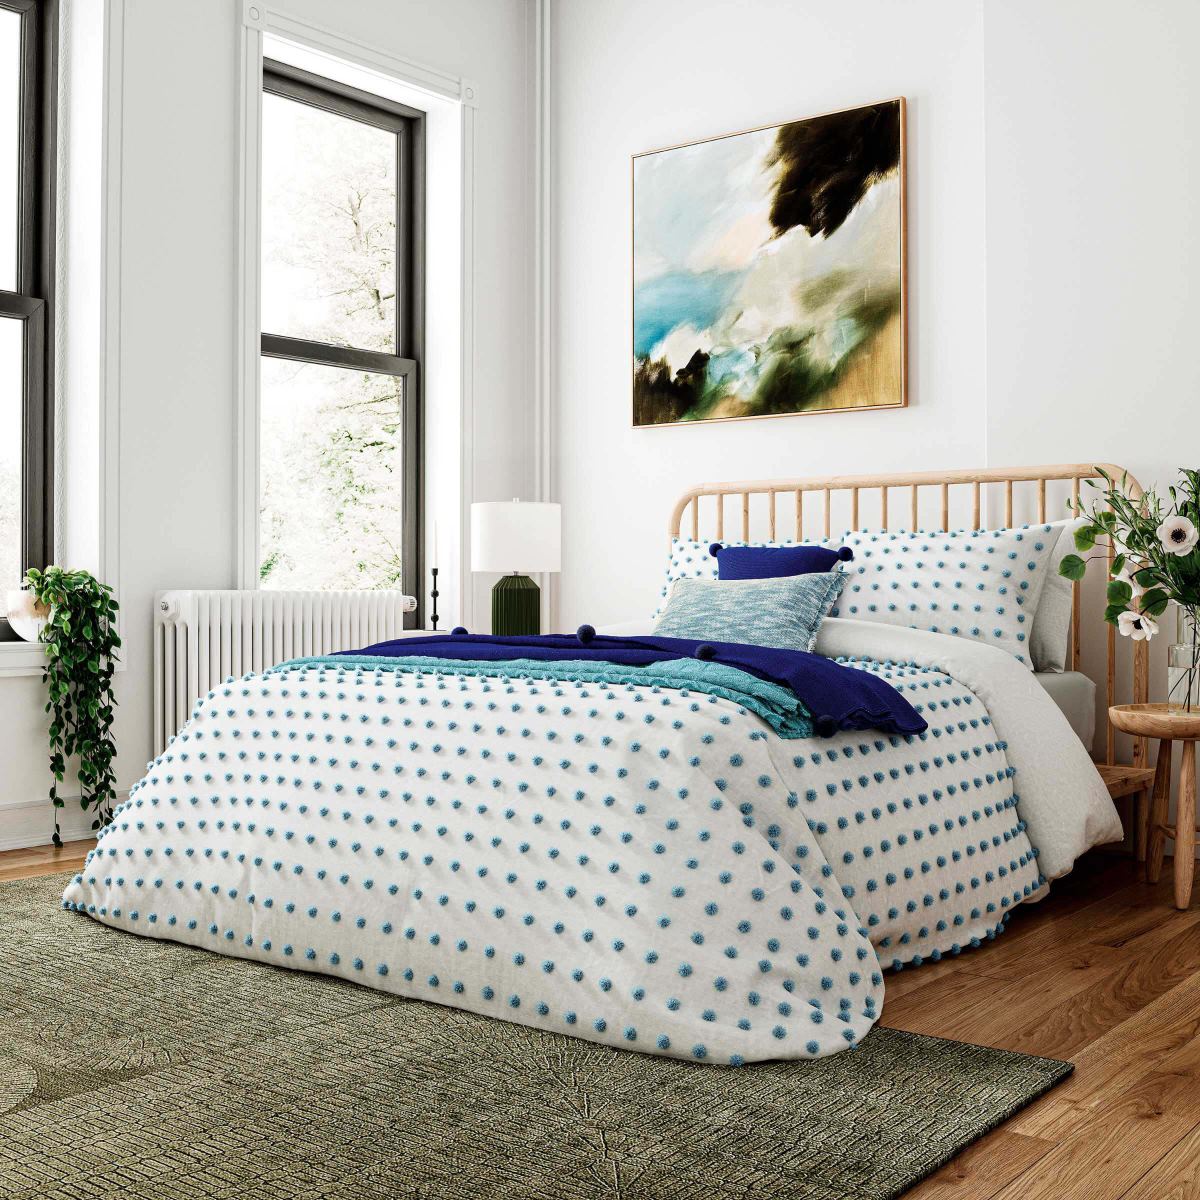 Bedsure Cotton Duvet Cover King - 100% Cotton Waffle Weave Coconut White  Duvet Cover King Size, Soft and Breathable Duvet Cover Set for All Season